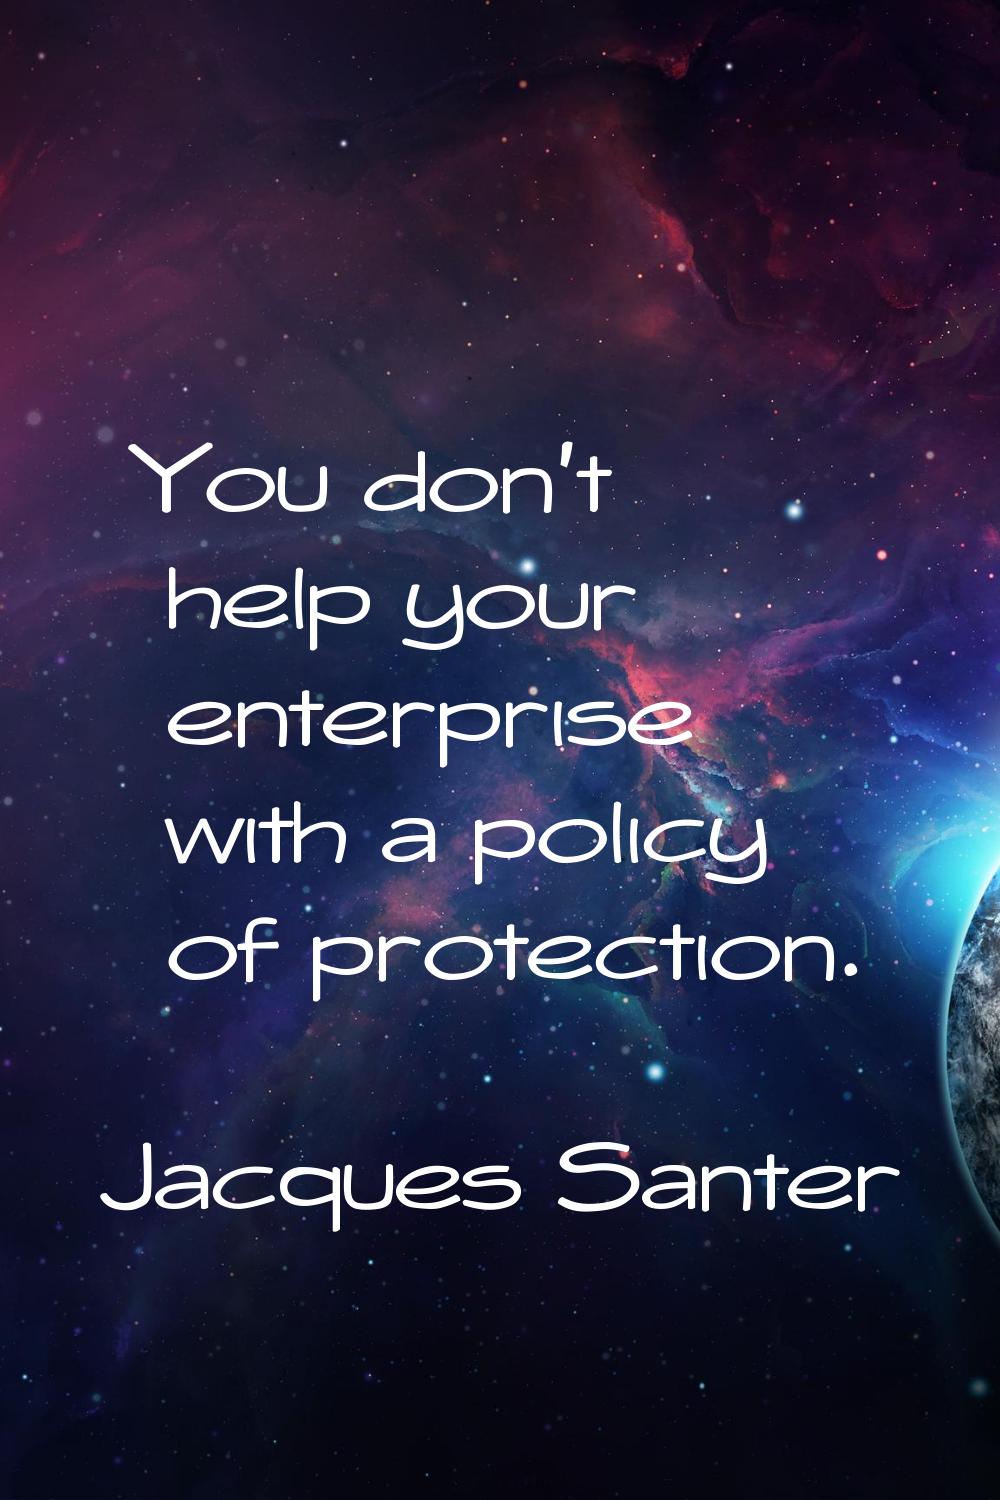 You don't help your enterprise with a policy of protection.